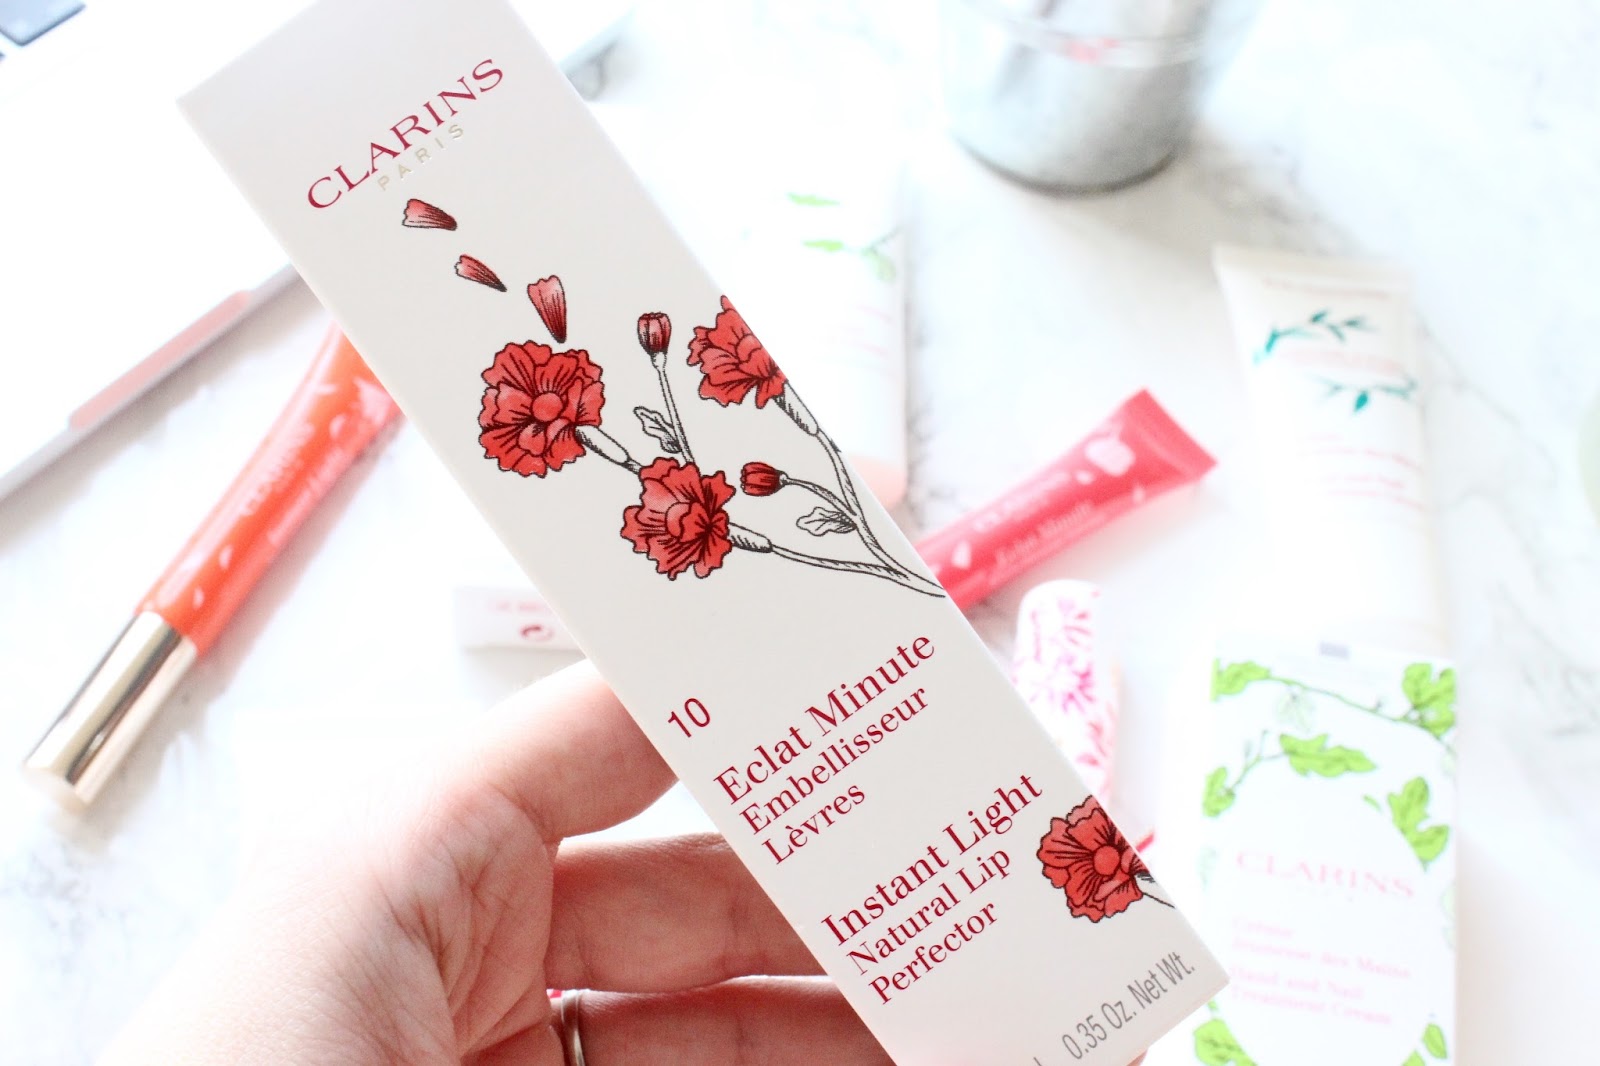 Clarins Limited Edition Collection